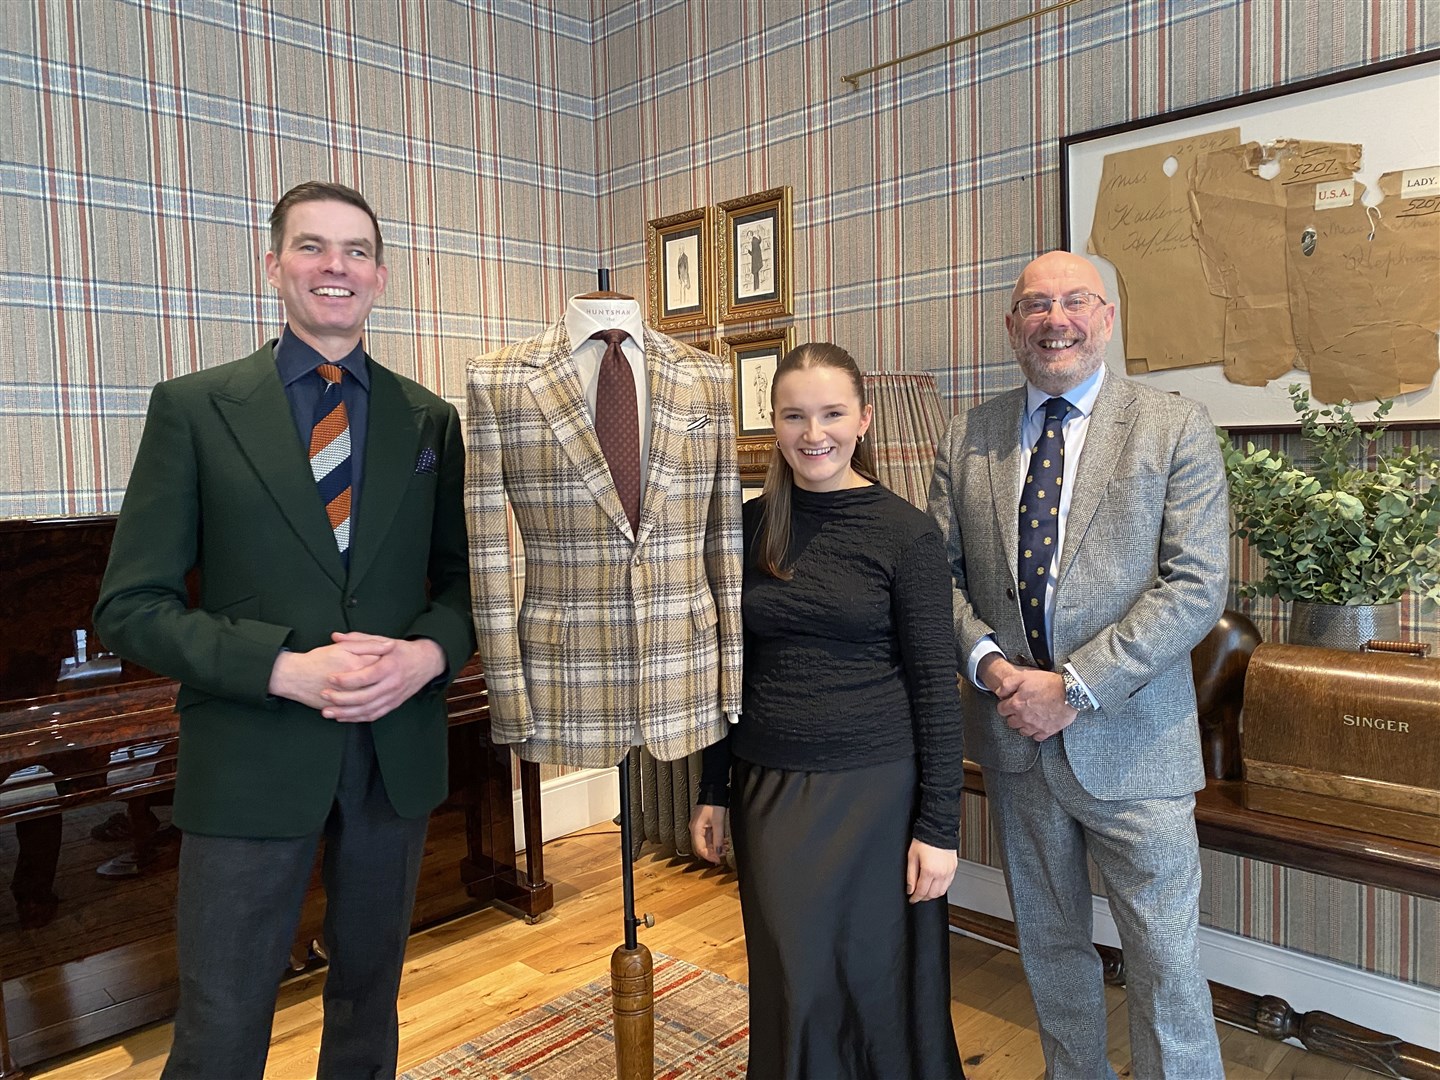 Lois Cowie admires the sports jacket made from her winning textile design, joined by Campbell Carey (left), the Head Cutter and Creative Director at Huntsman, and Iain Milligan, Managing Director of Huddersfield Fine Worsteds.